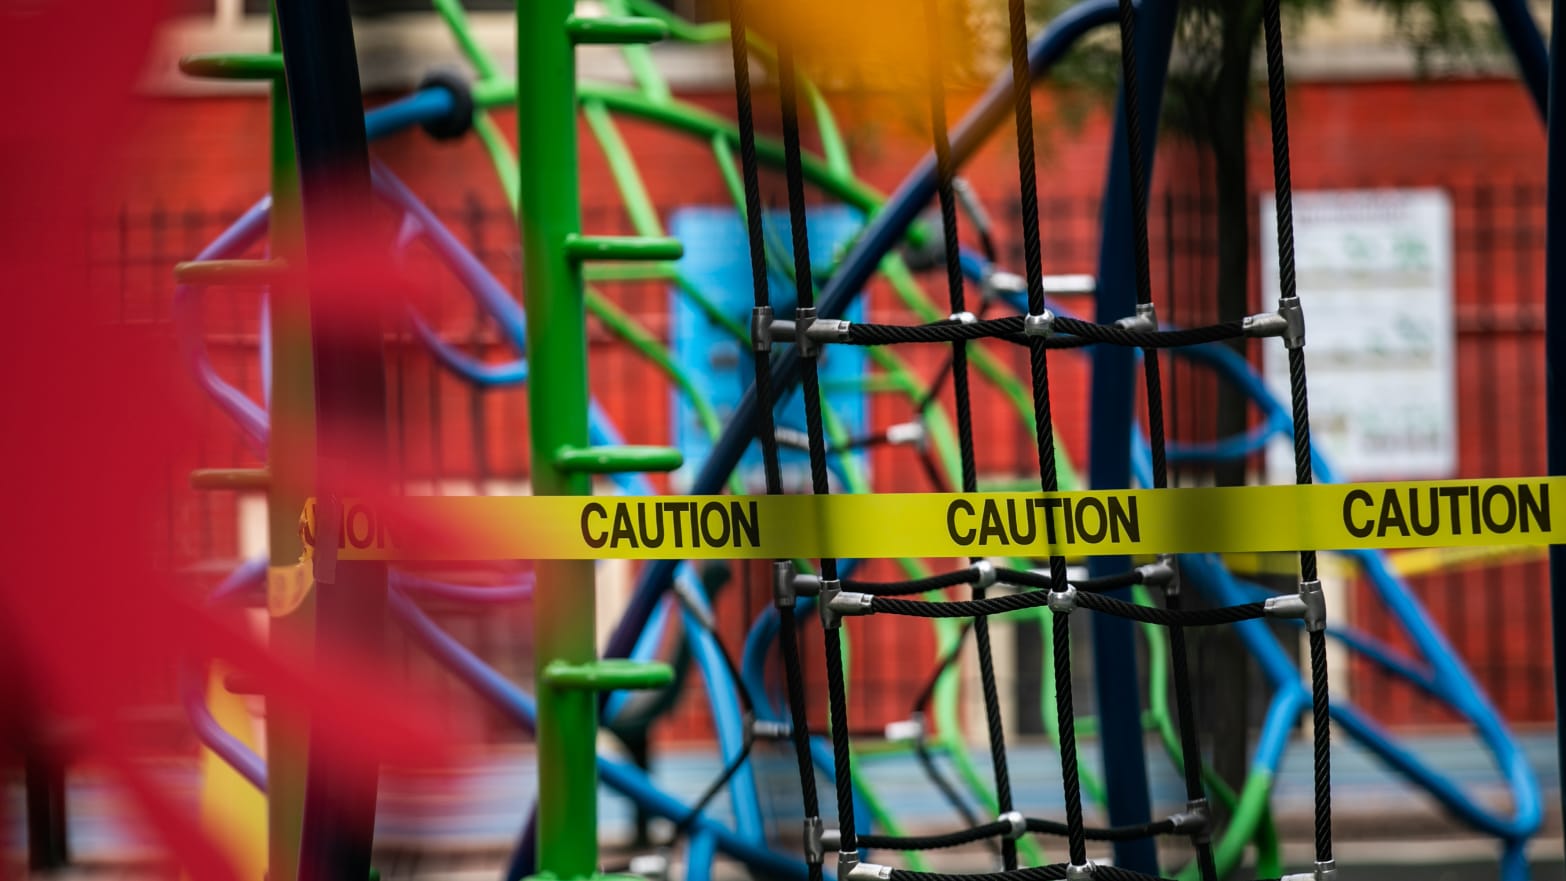 A caution tape is put up around the playground at Public School 33 following the outbreak of the coronavirus disease (COVID-19) in the Manhattan borough of New York City, New York, U.S.